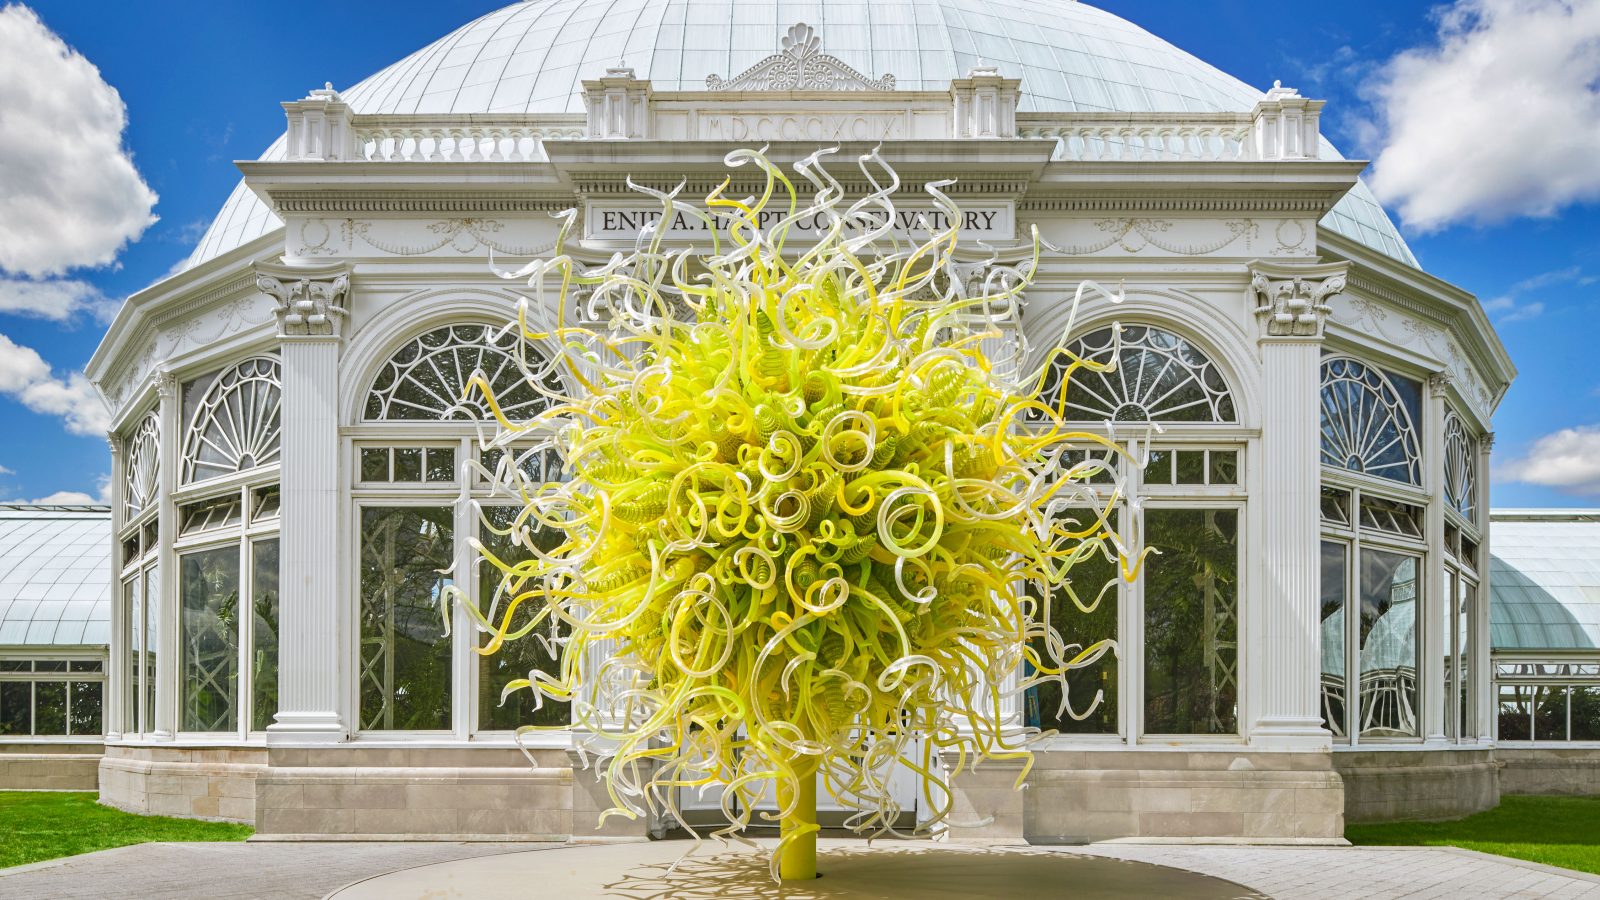 Celebrate Art And Creativity With Chihuly Nights In The Bronx This October